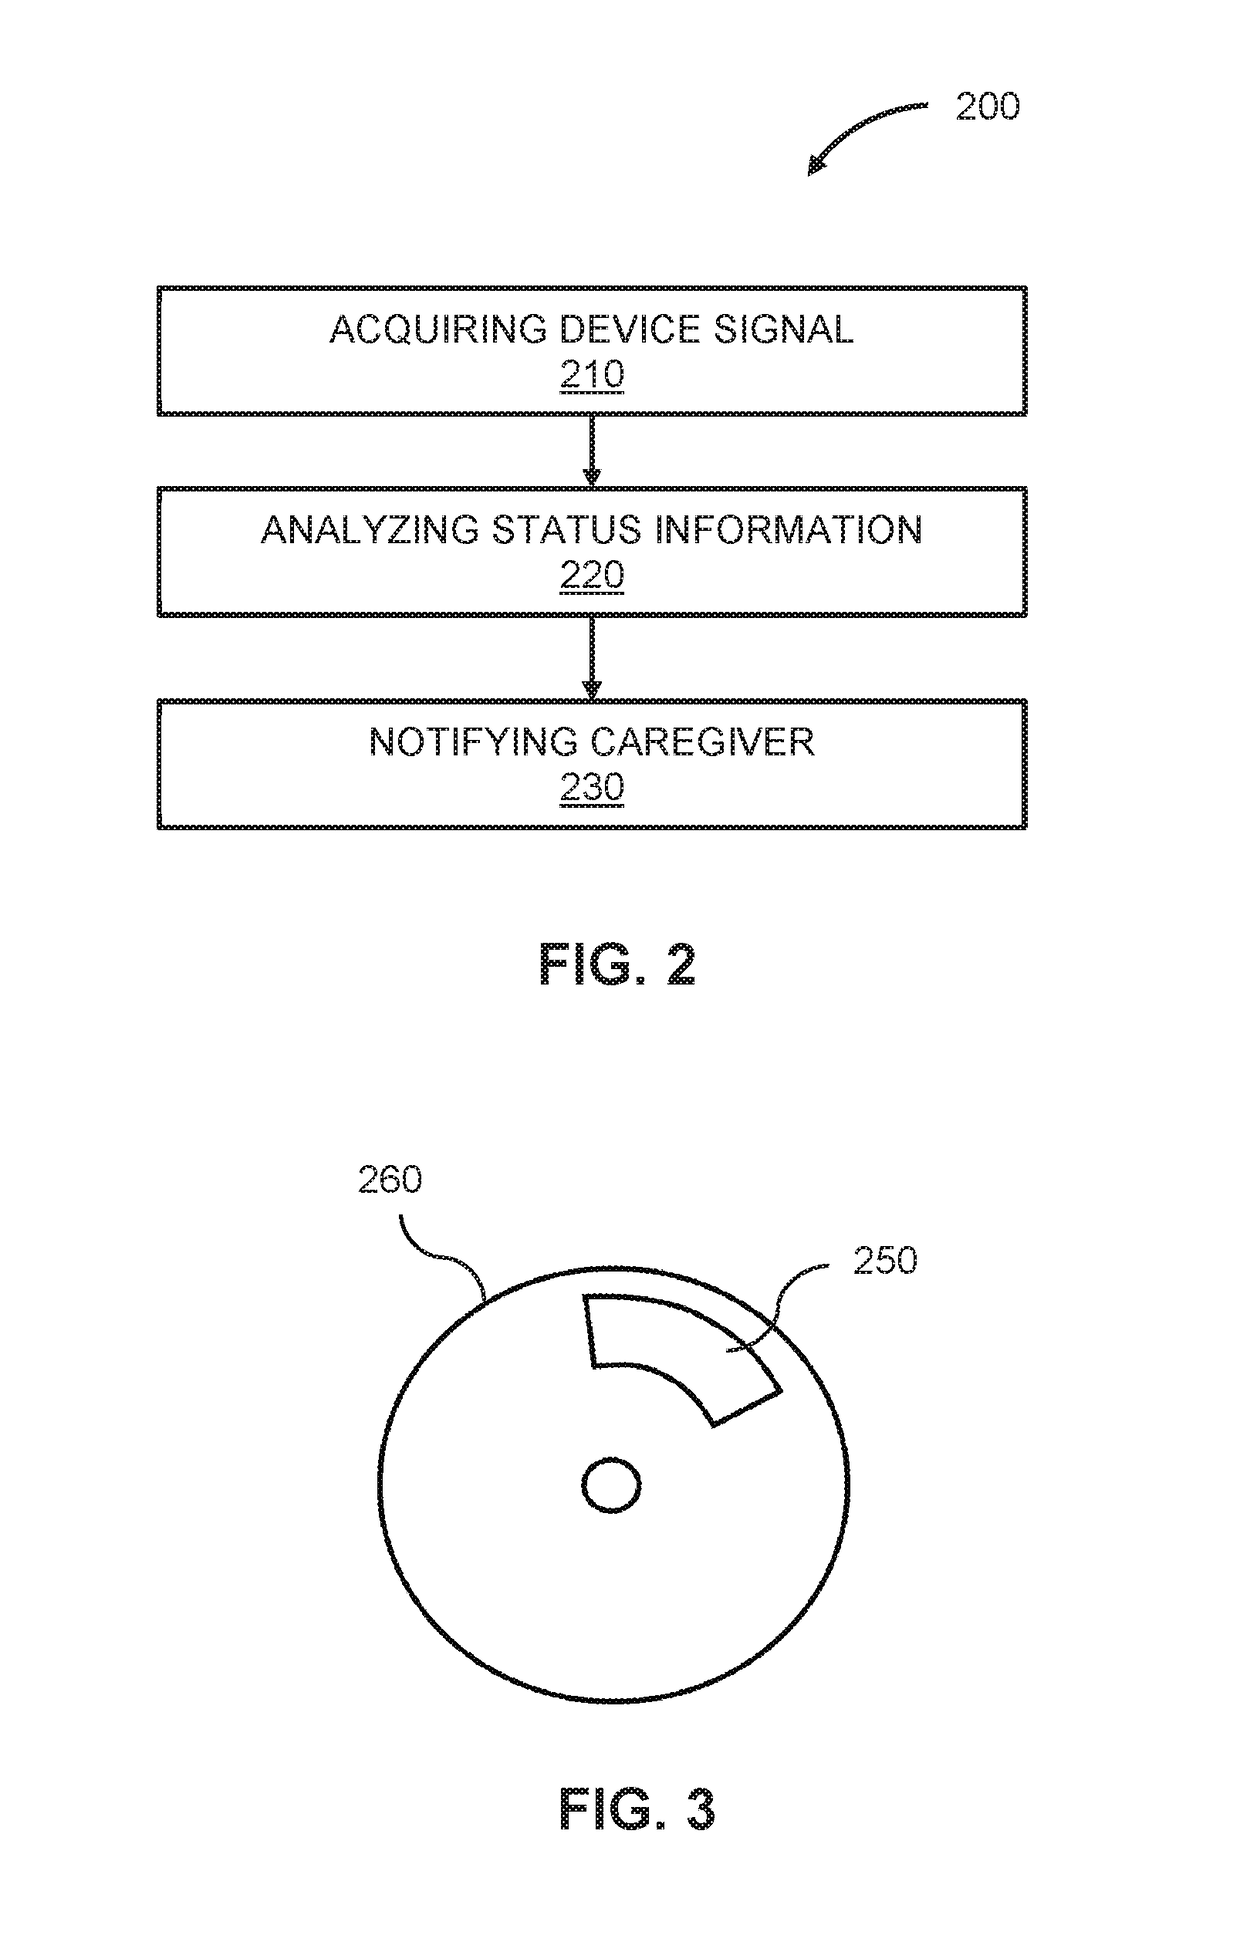 Processing status information of a medical device